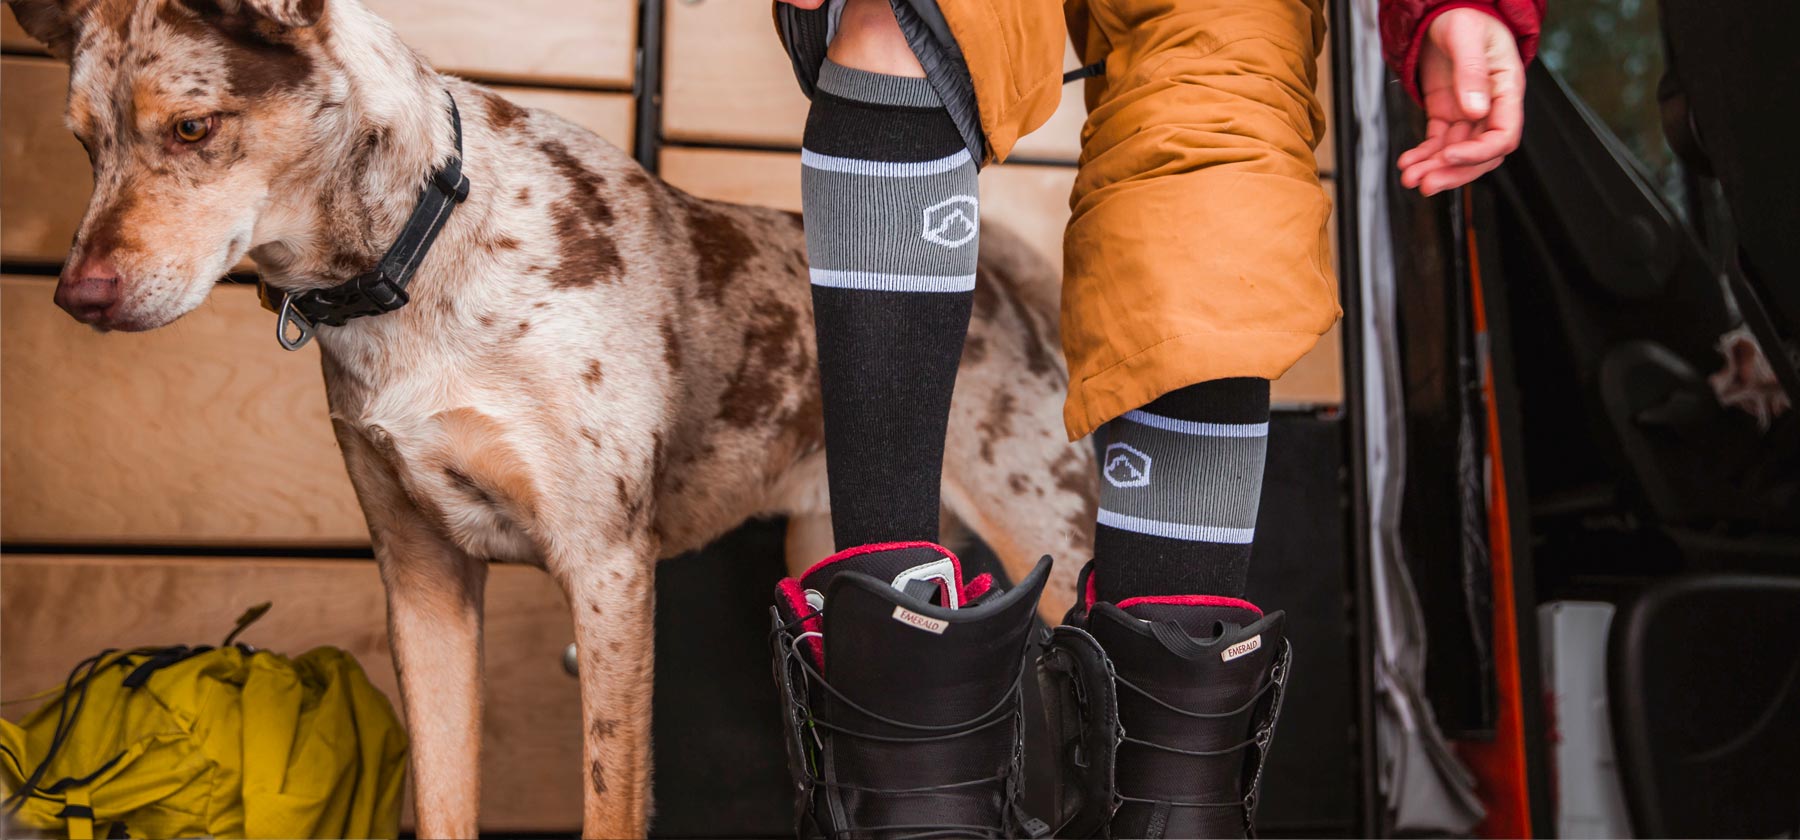 Snowboarder and dog standing in camper van putting on Cloudline socks and snowboard boots. 